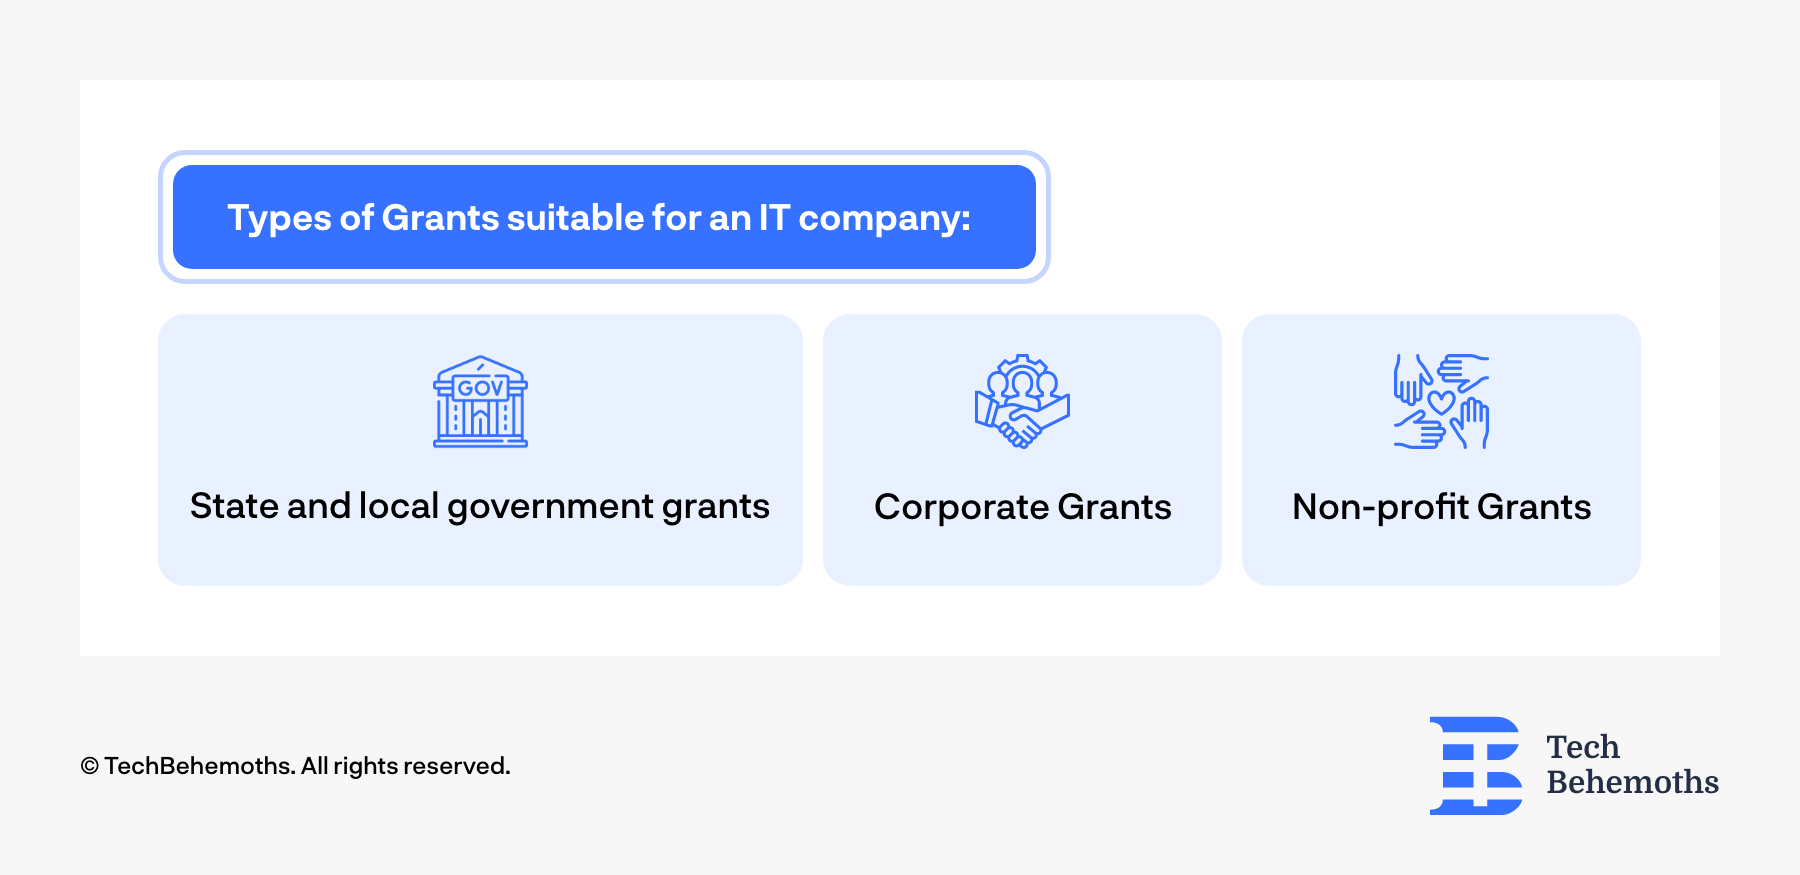 Types of Grants suitable for IT companies